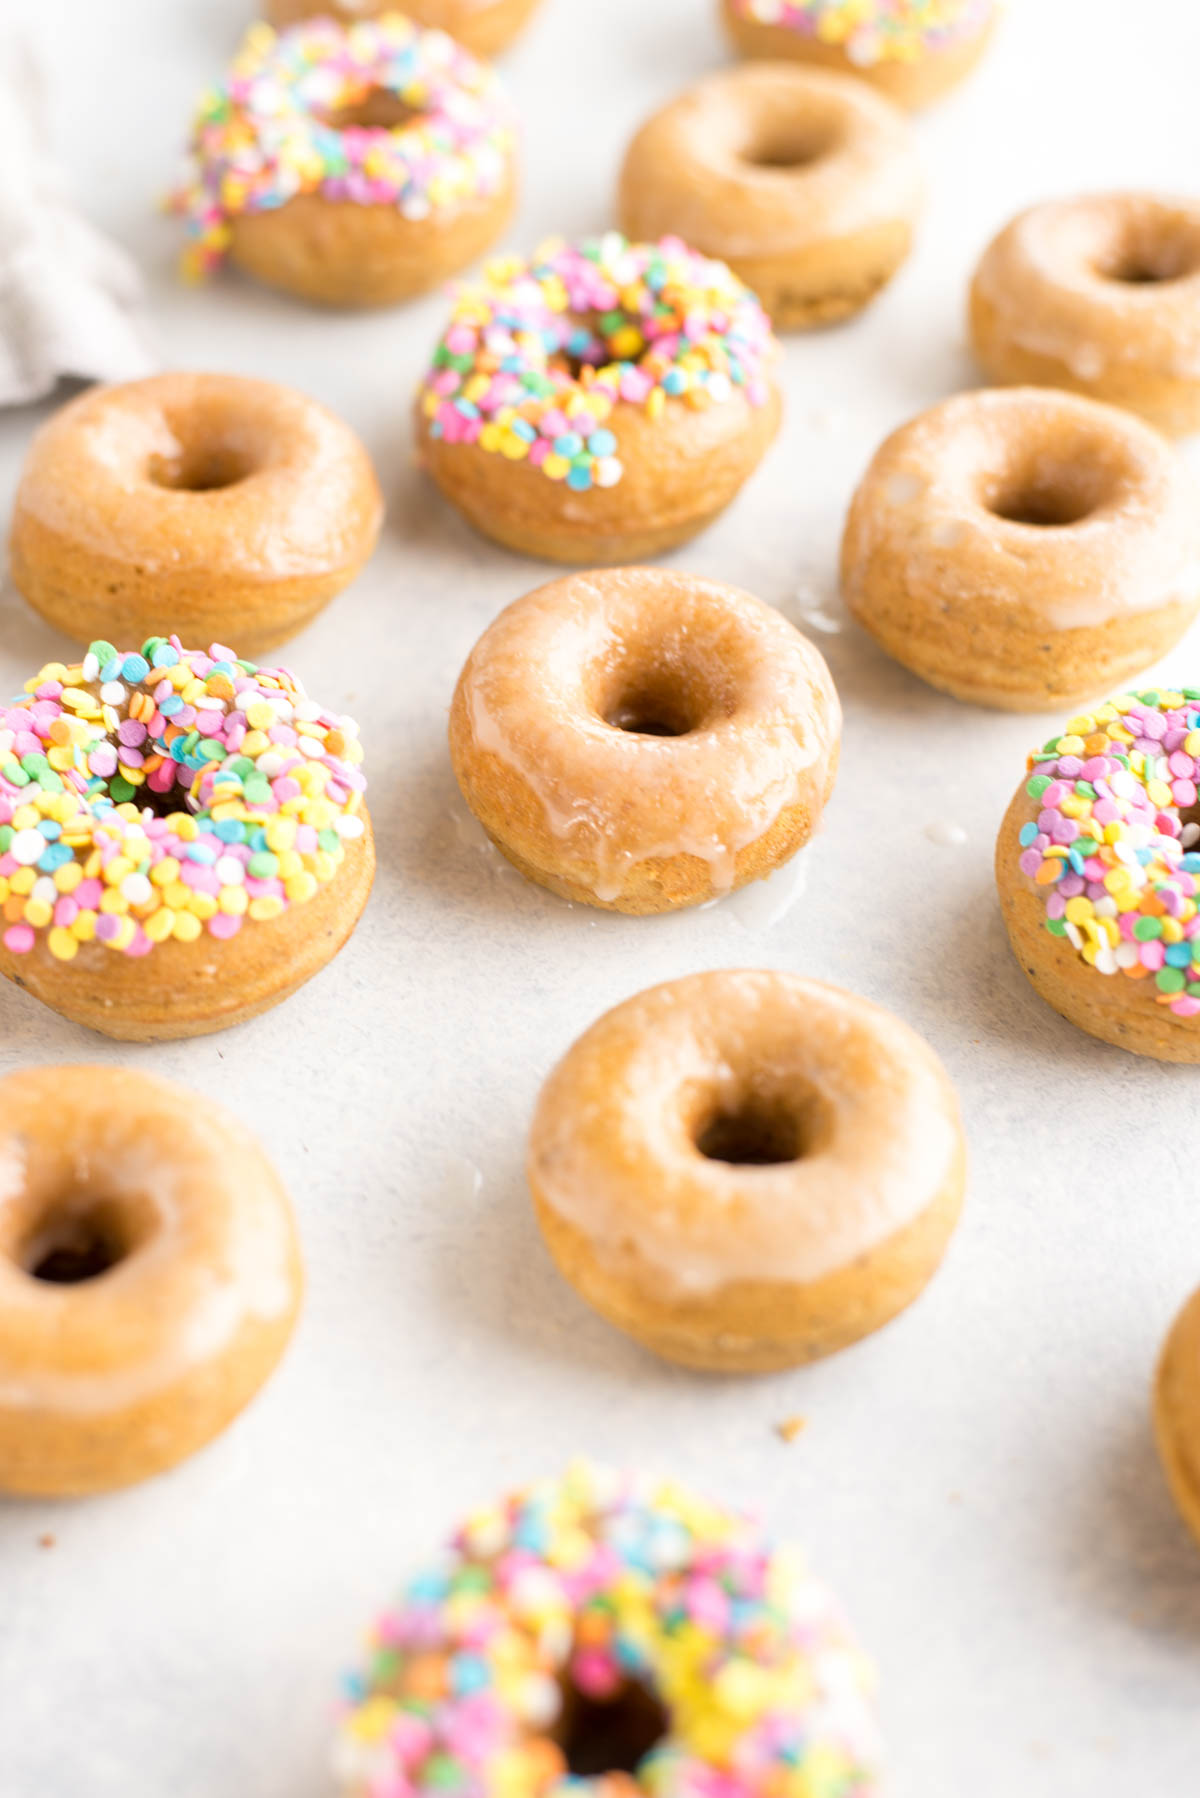 These easy lemon old-fashioned gluten-free donuts are low carbohydrate, high protein and high in fiber. 